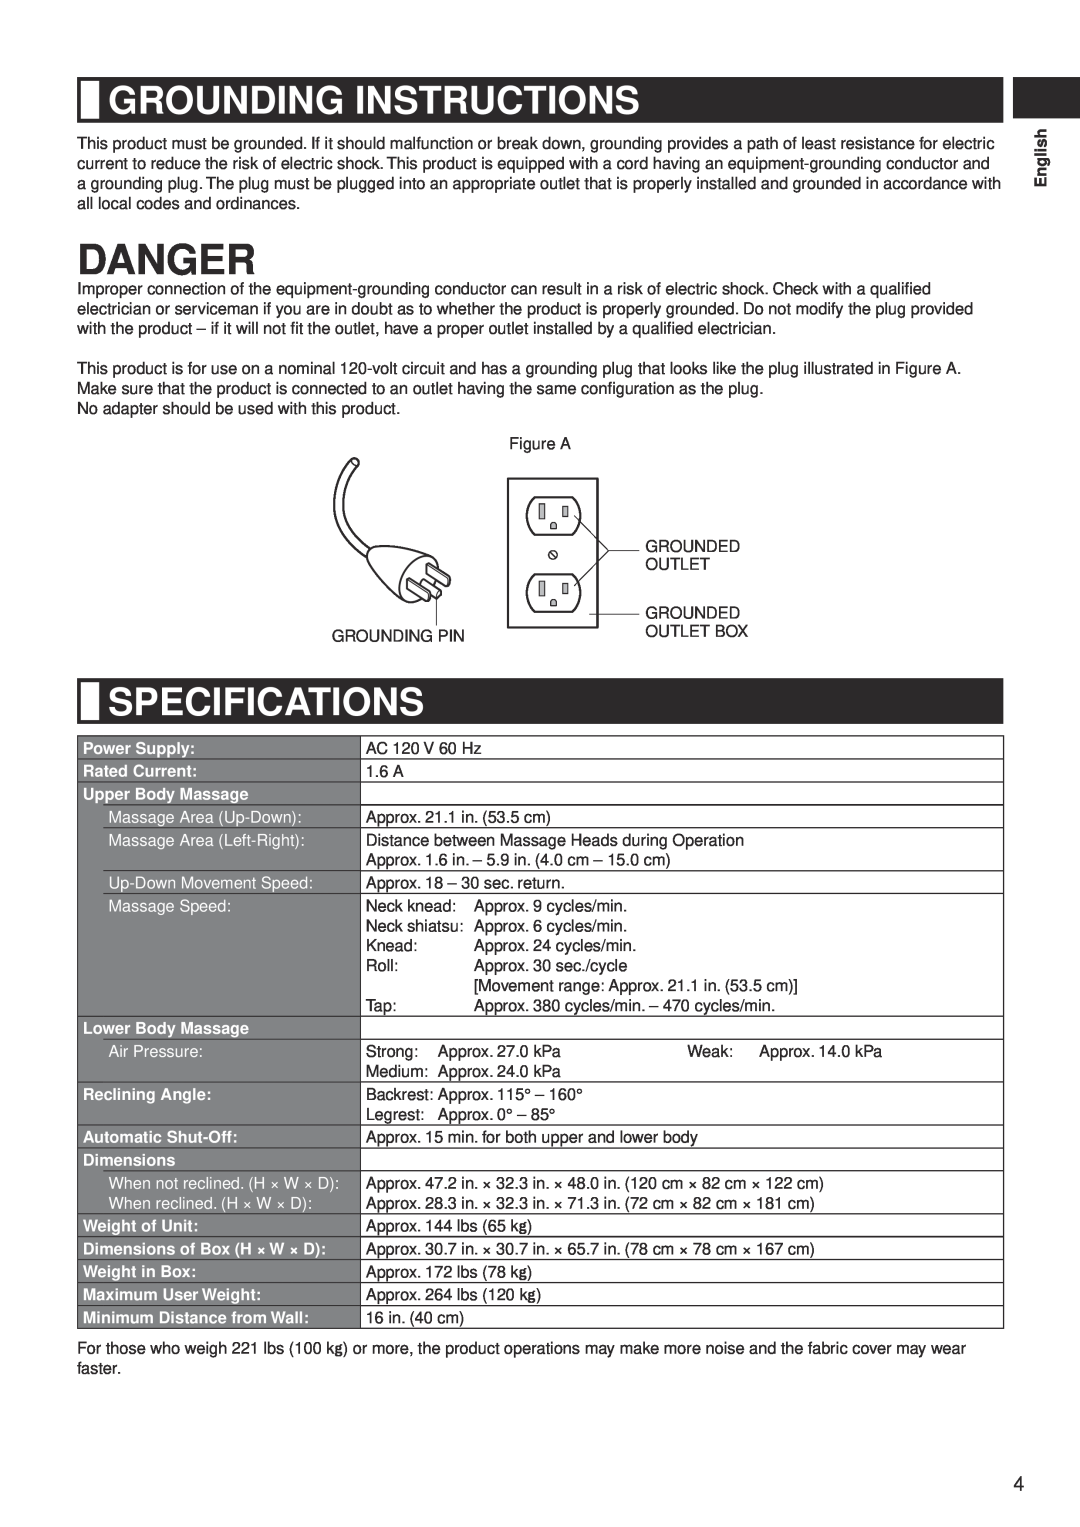 Panasonic EP-MA10 manual Danger, Grounding Instructions, Specifications, Massage Area Up-Down, Massage Area Left-Right 